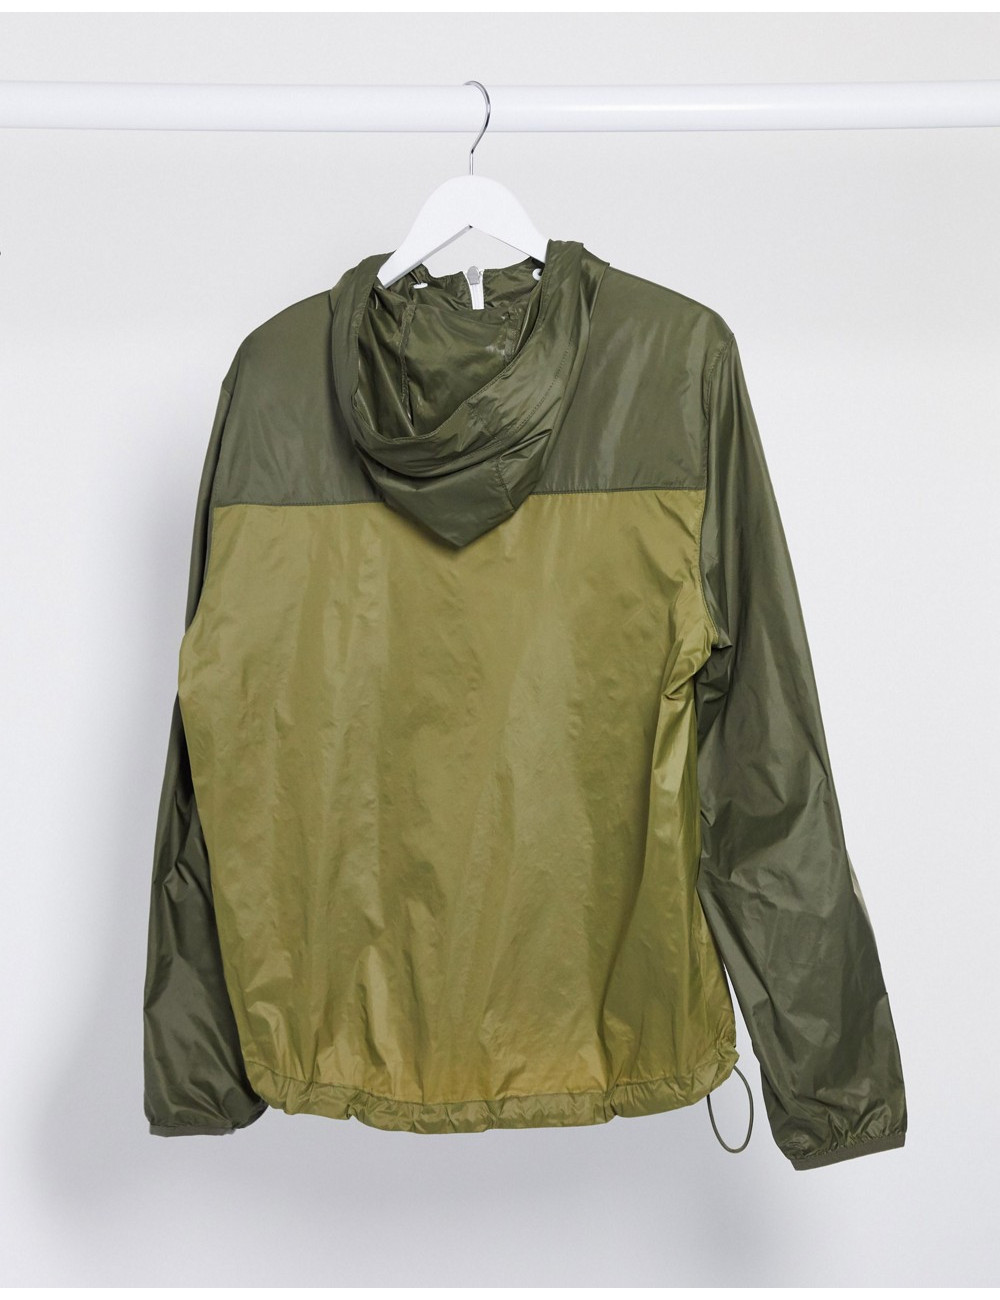 Timberland route racer jacket